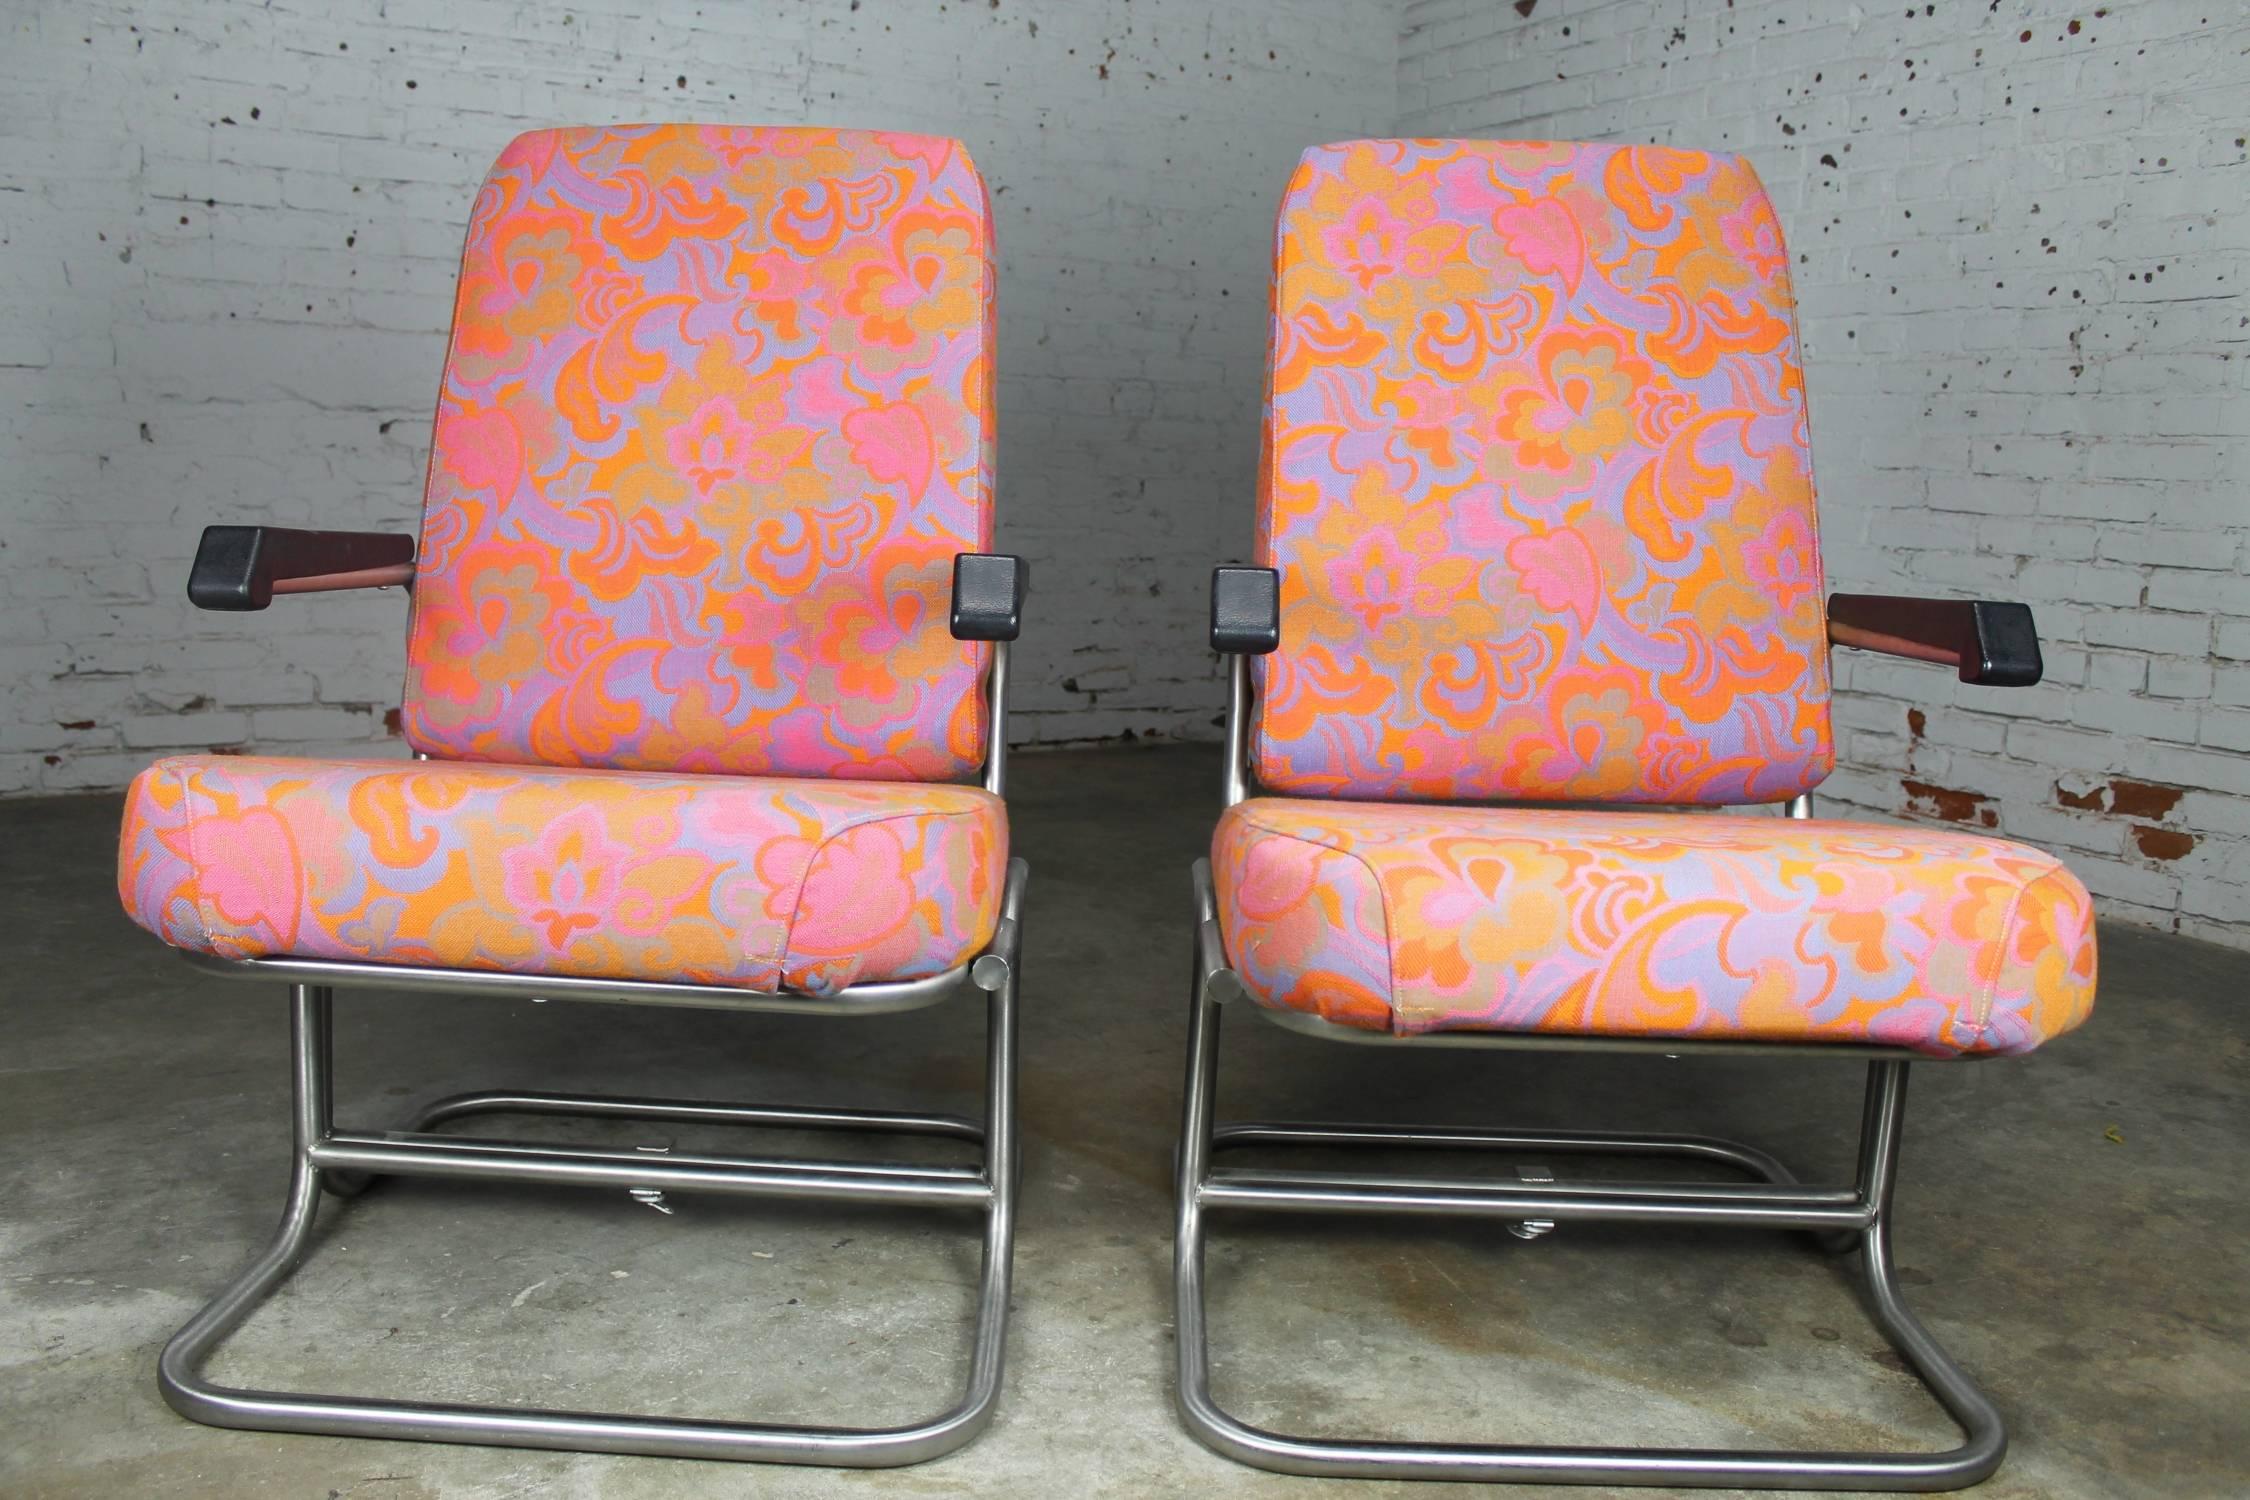 Just look at this fabulous pair of original circa 1960s Mid-Century Modern lounge chairs from a Pullman train car! They fold to suitcase size for storage and are in near excellent condition with their original mod fabric and stainless steel